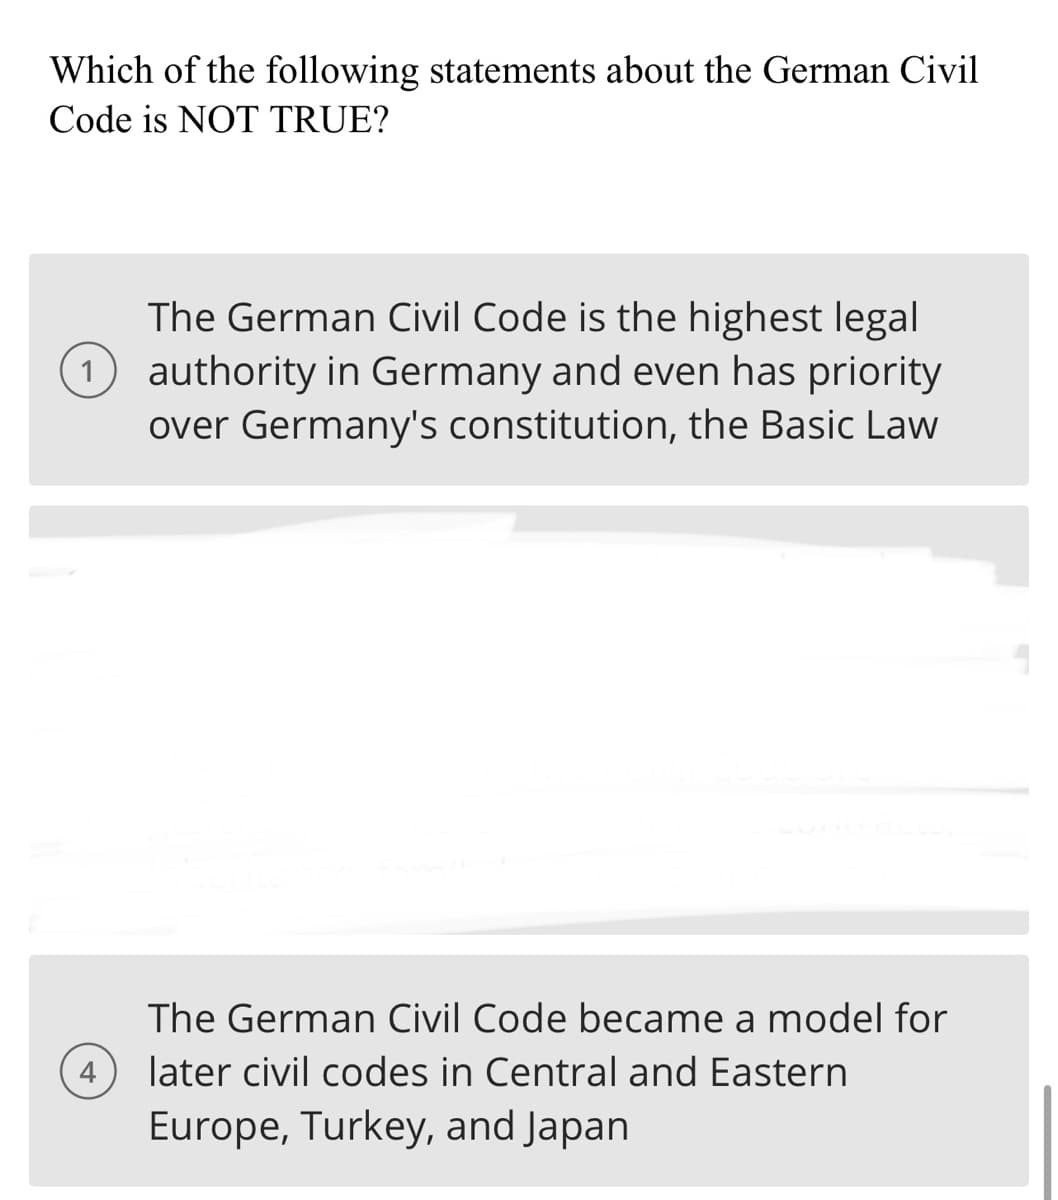 Which of the following statements about the German Civil
Code is NOT TRUE?
The German Civil Code is the highest legal
1 authority in Germany and even has priority
over Germany's constitution, the Basic Law
The German Civil Code became a model for
later civil codes in Central and Eastern
Europe, Turkey, and Japan